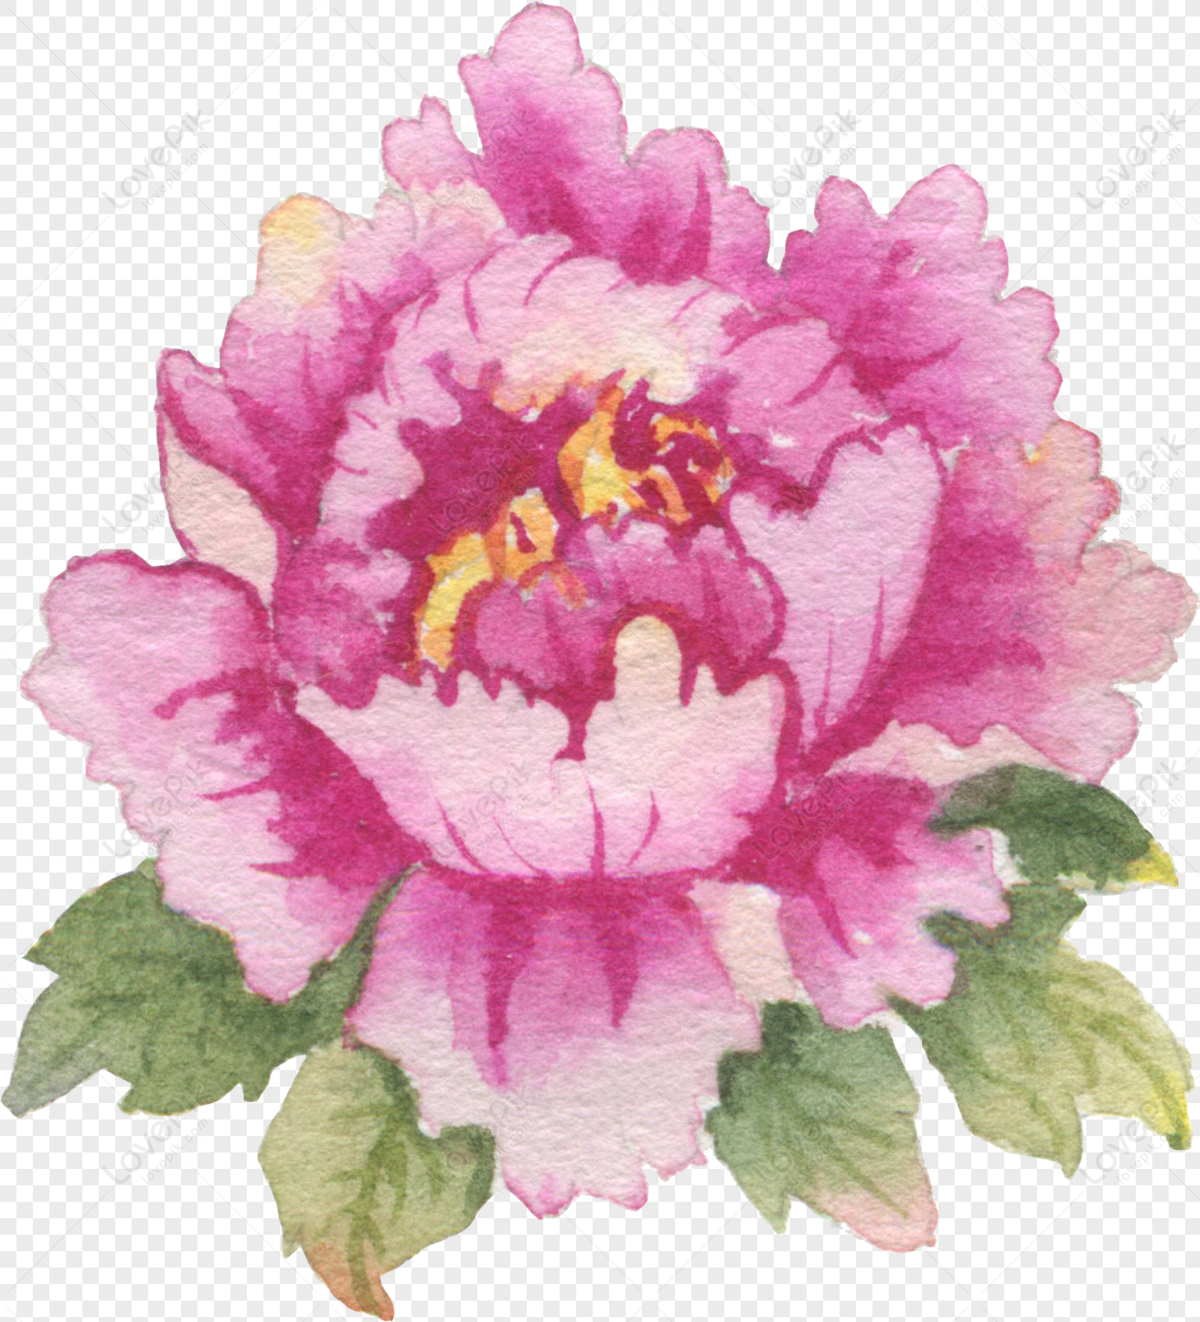 Watercolor Of National Flower Peony Flower PNG Transparent And Clipart  Image For Free Download - Lovepik | 400264376